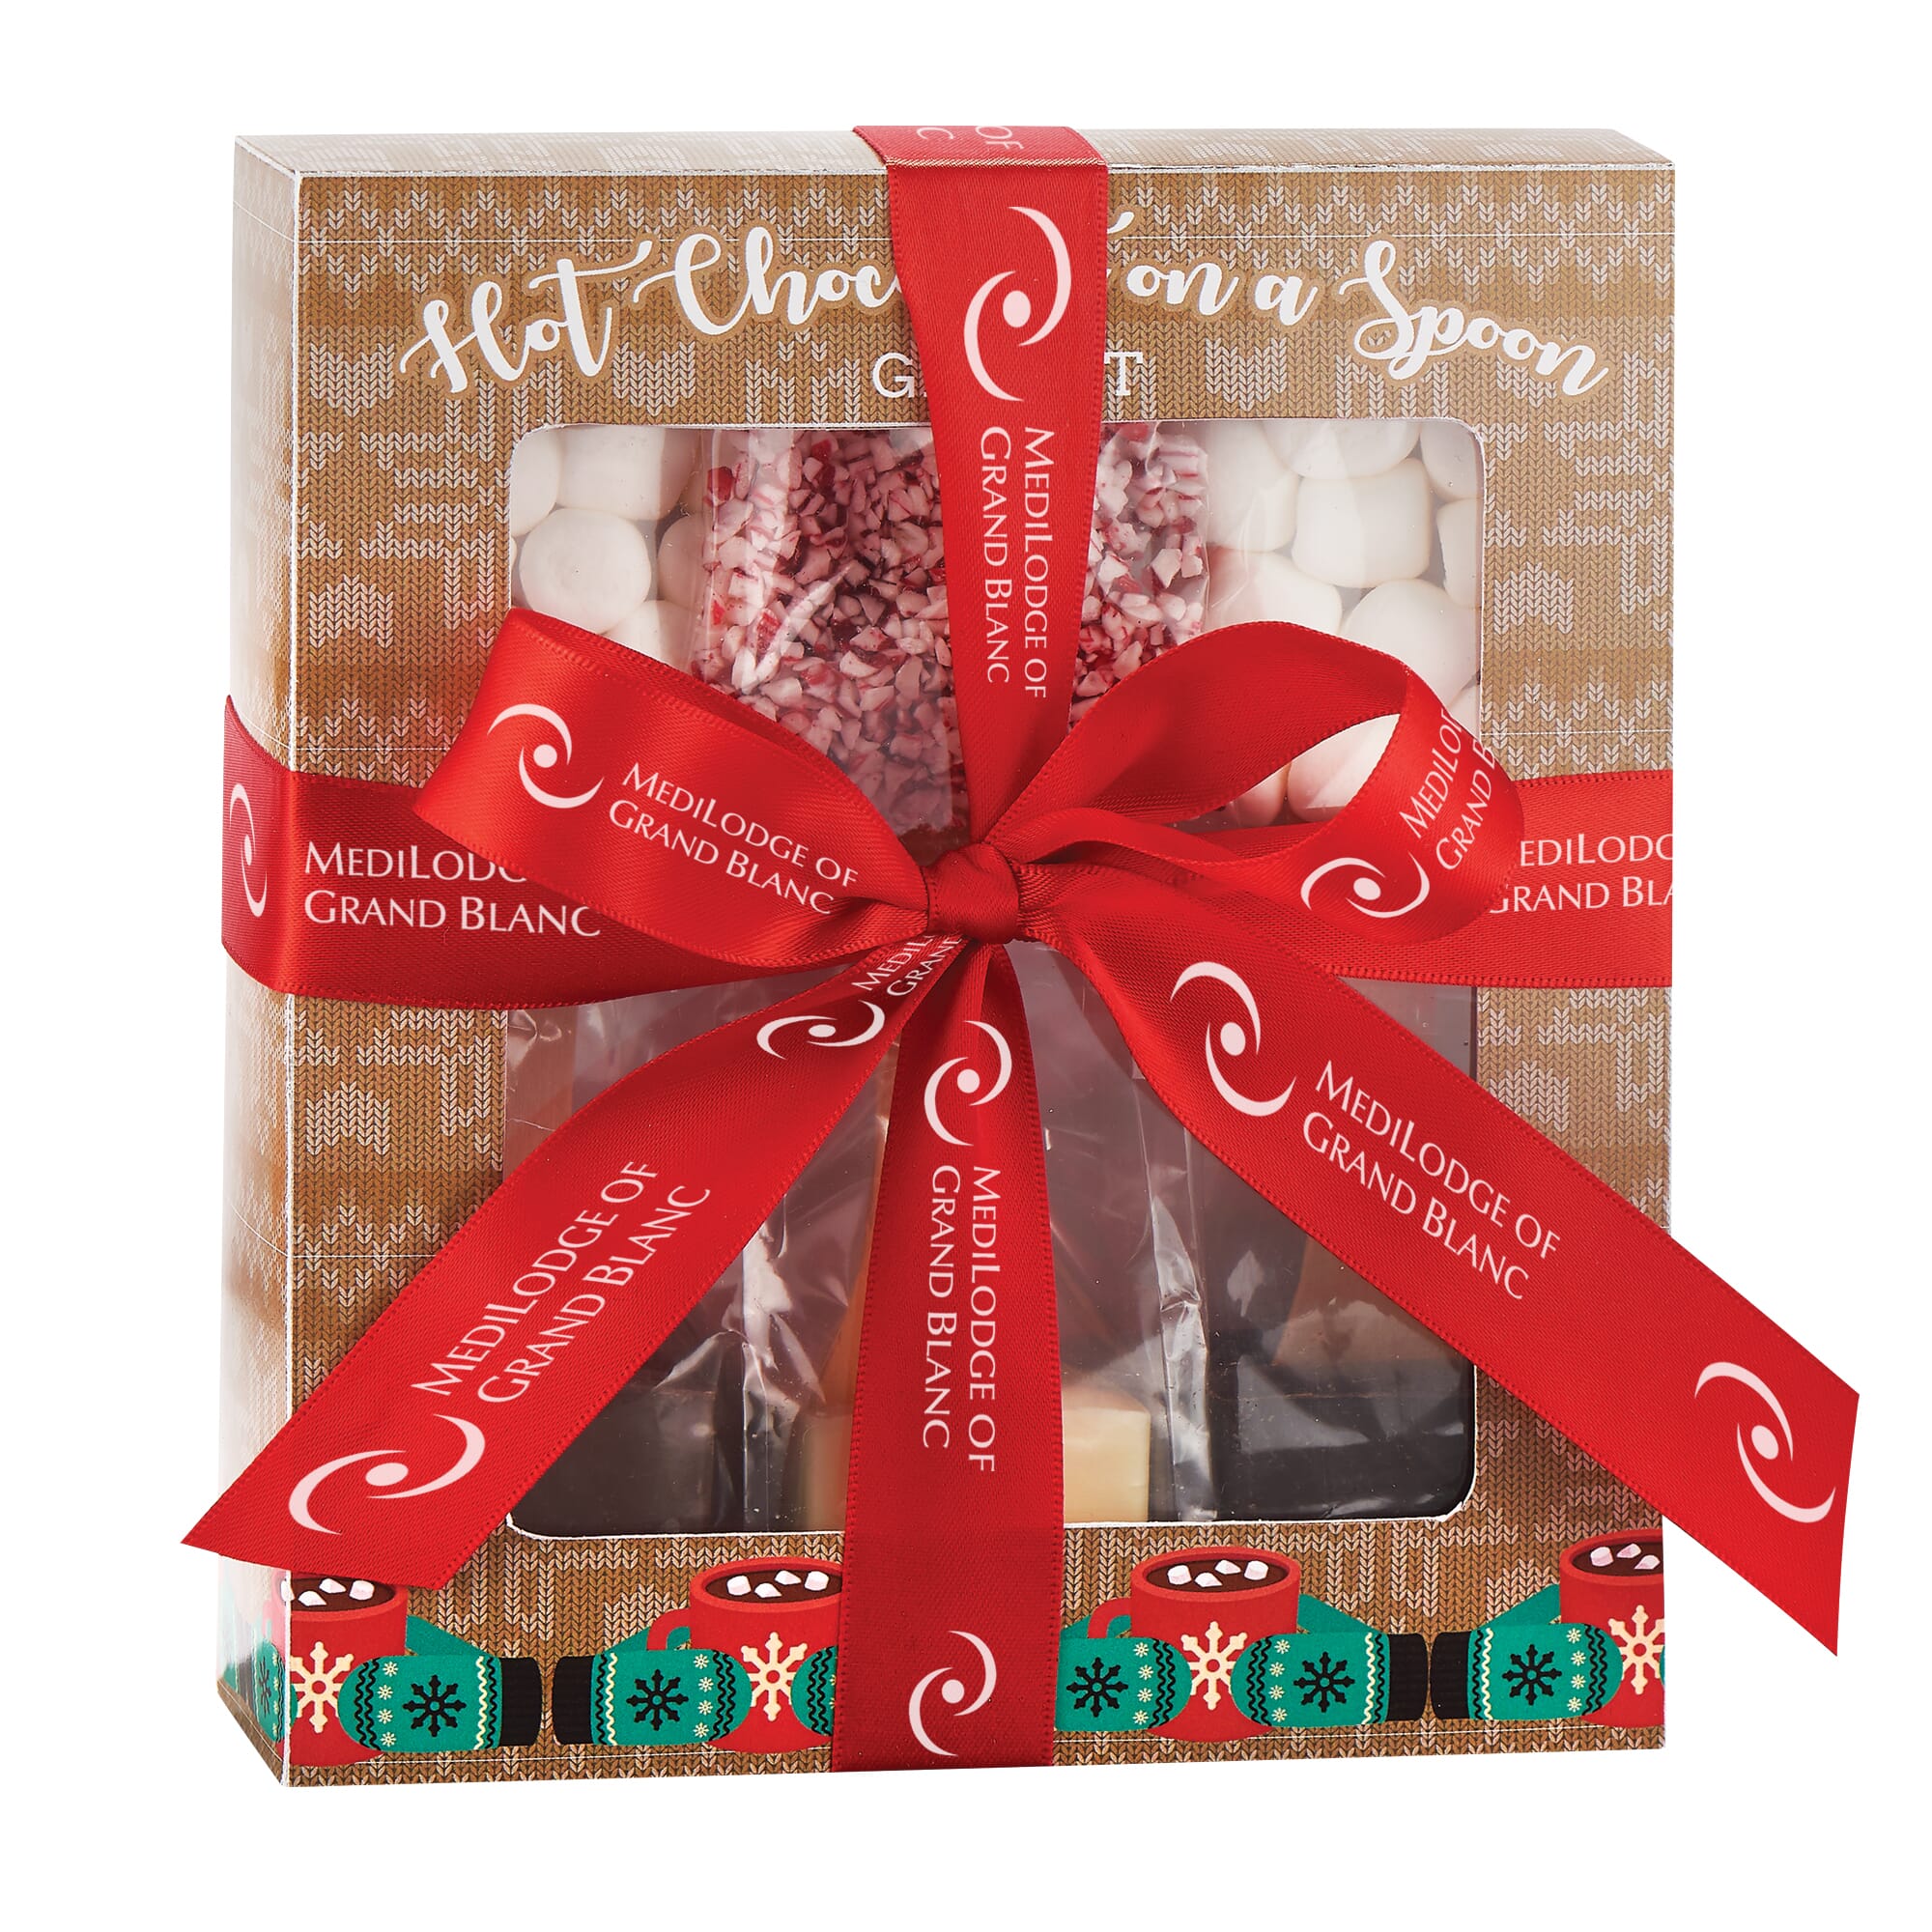 Hot Chocolate on a Spoon Kit Gift Box